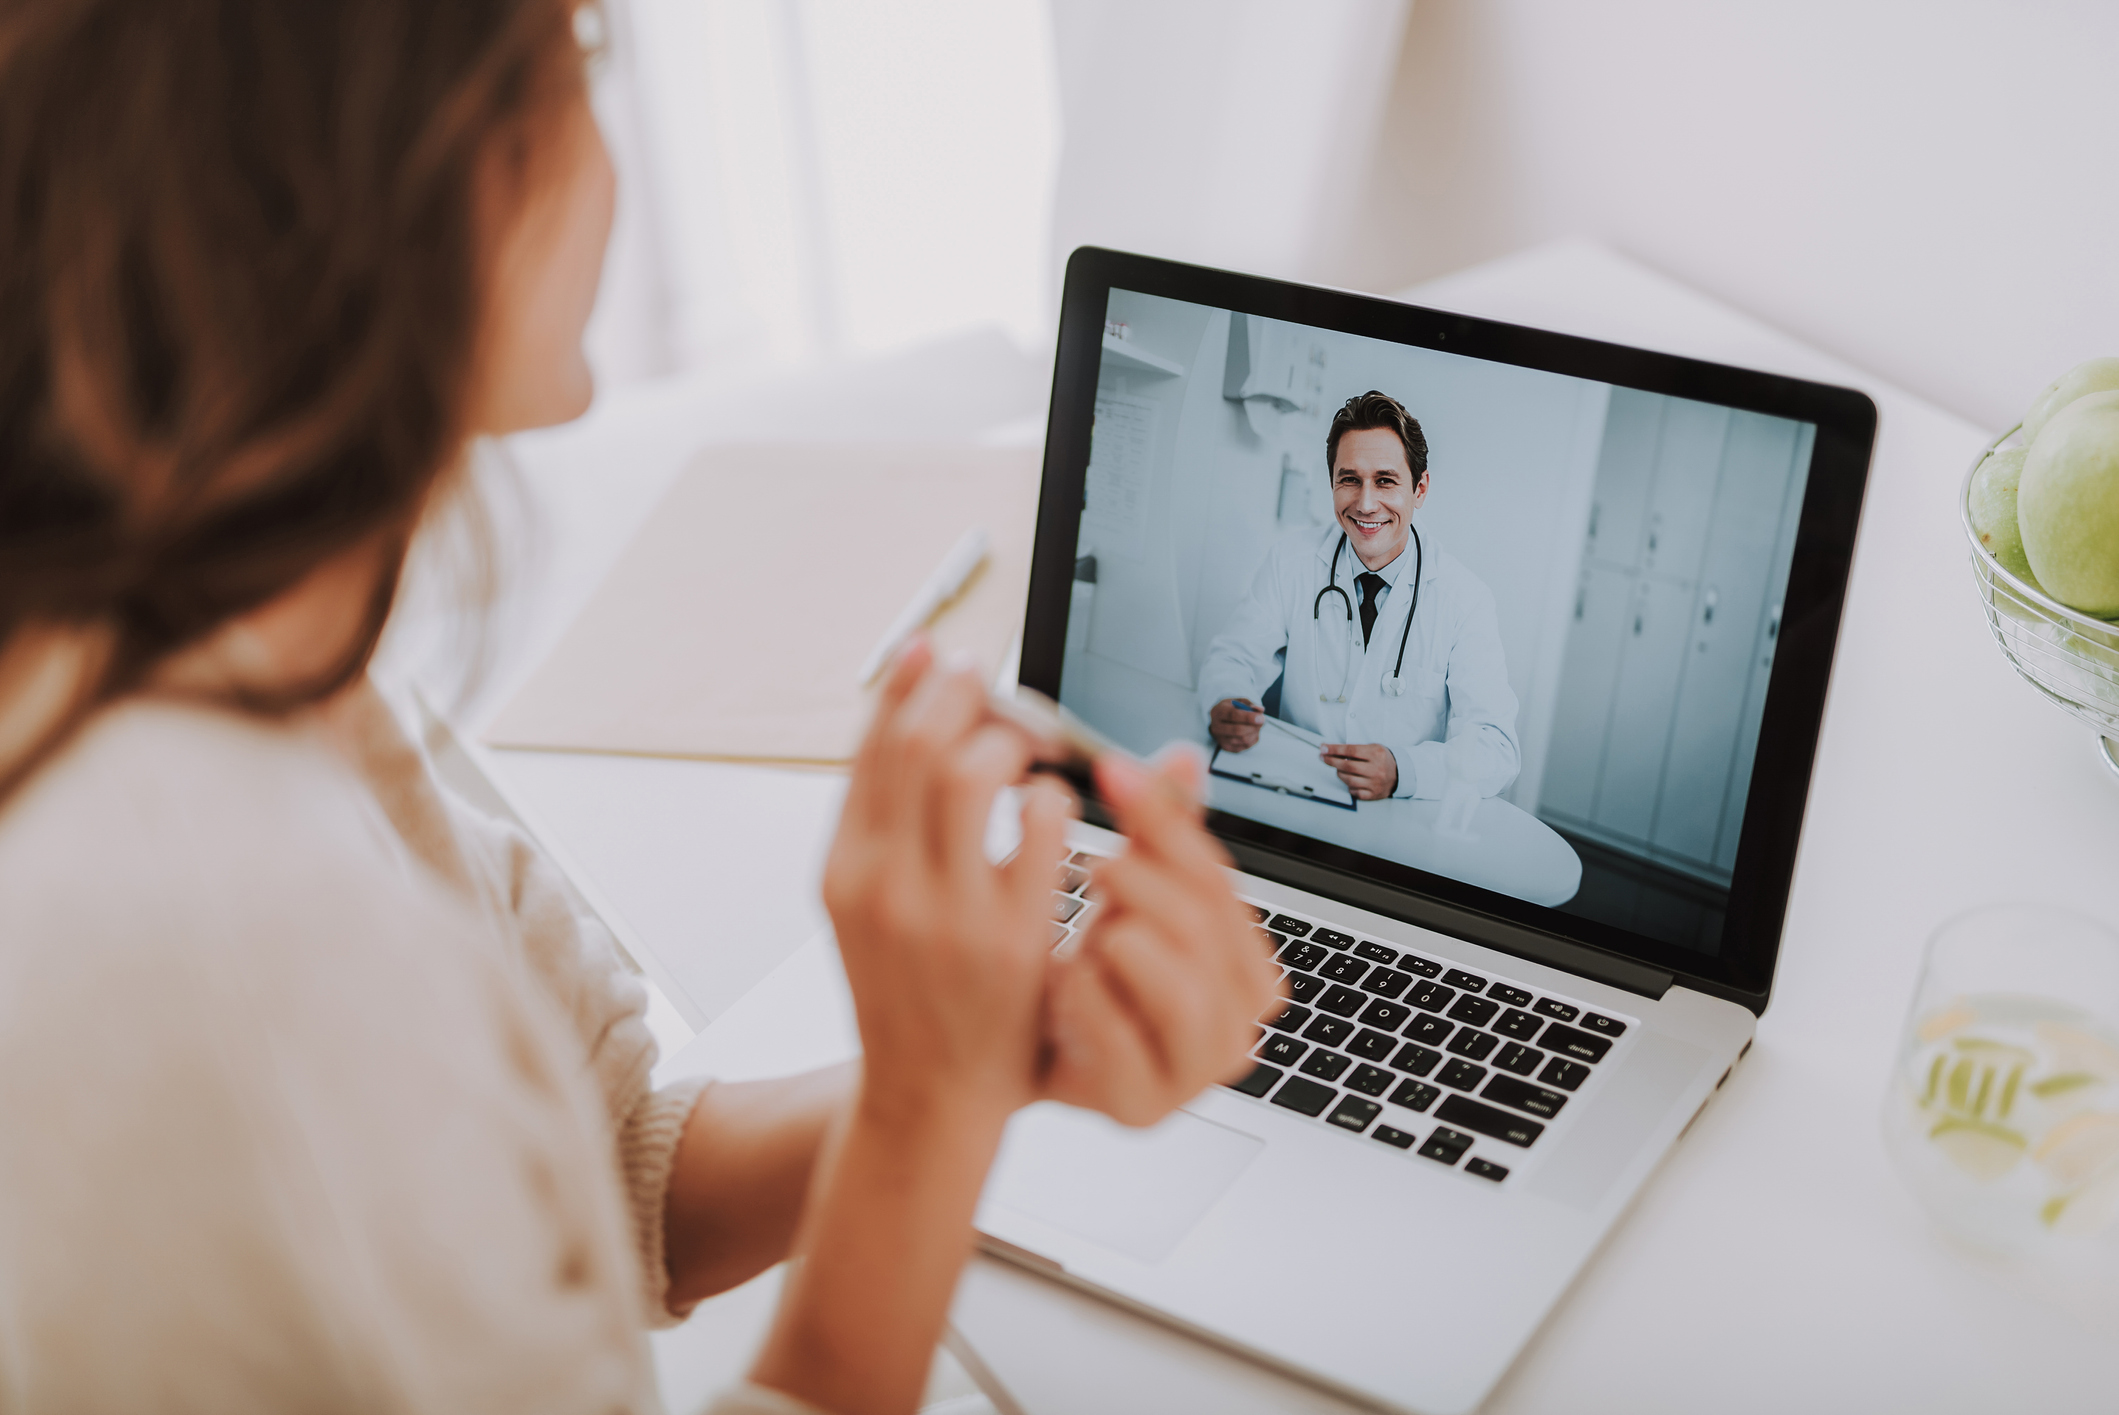 How Telehealth Impacts Patient Care